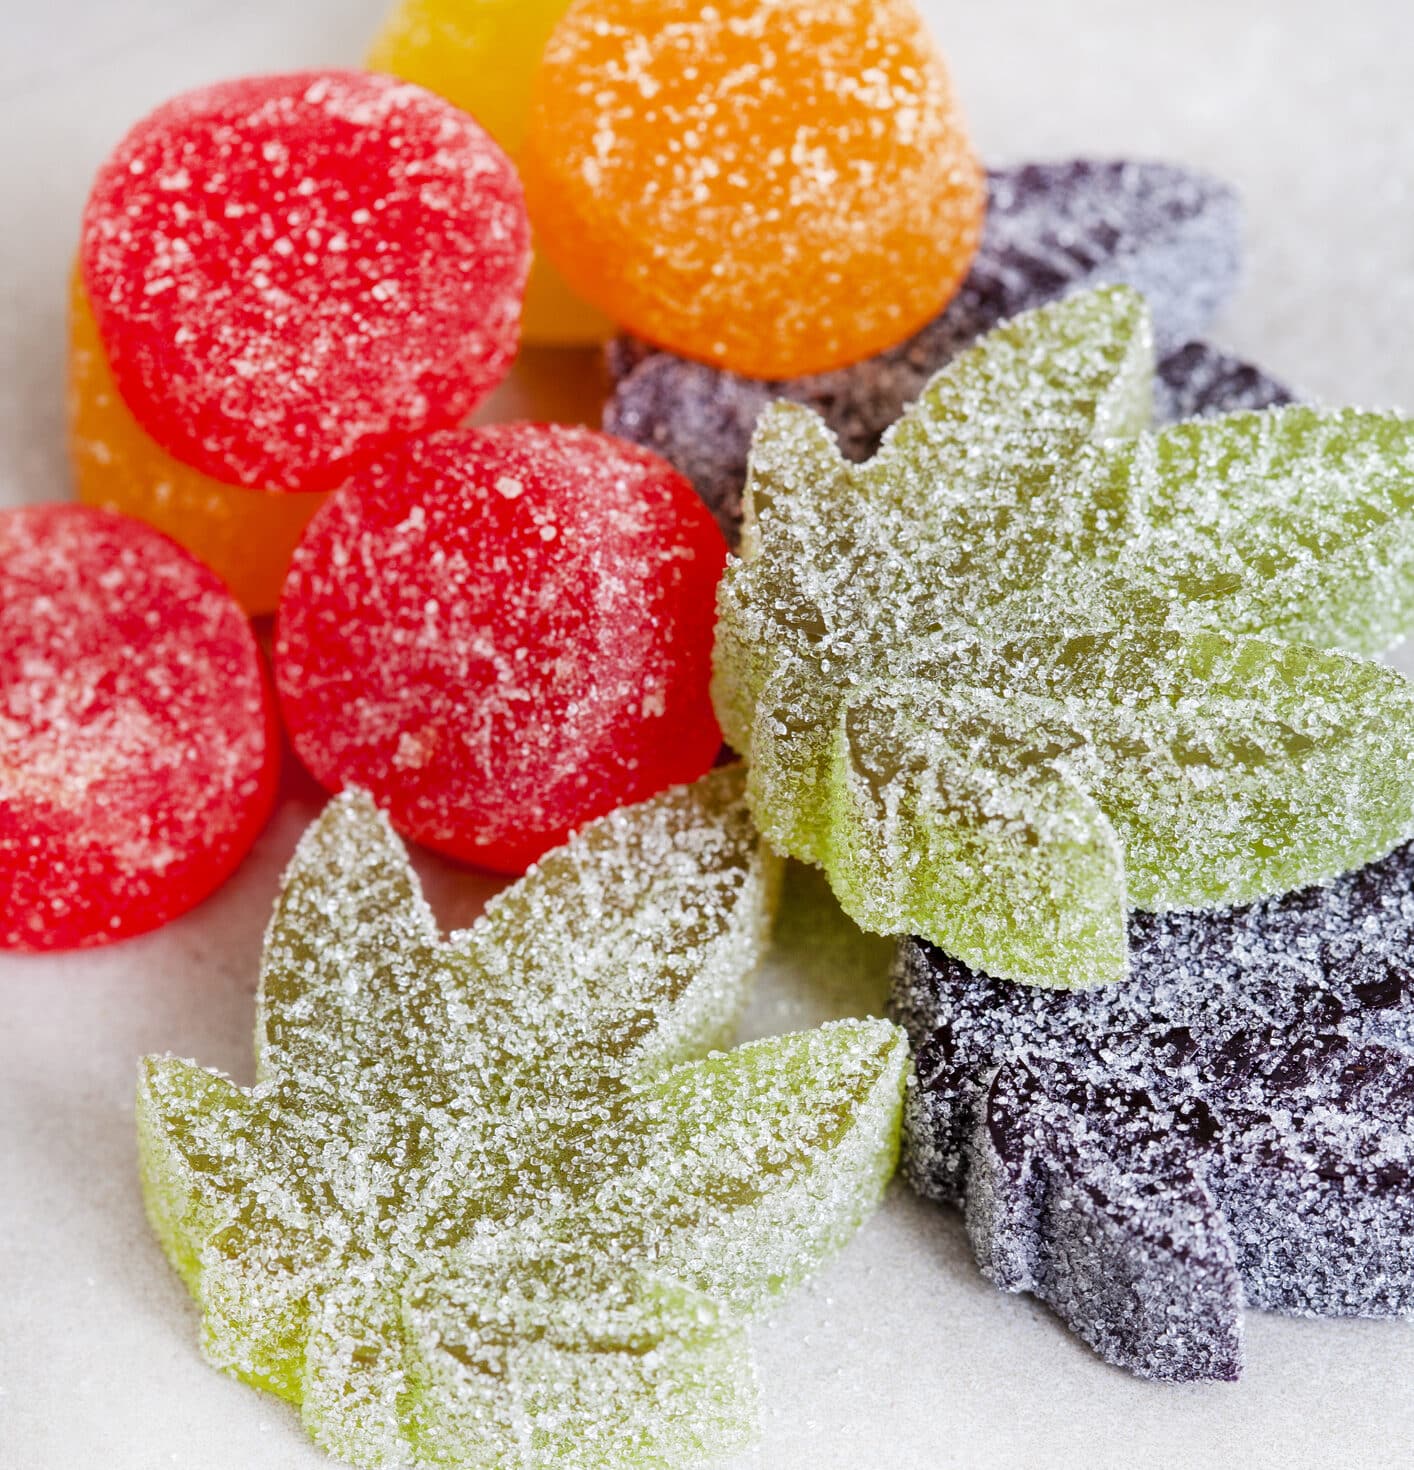 Shop The Best Gluten Free and Vegan Edibles